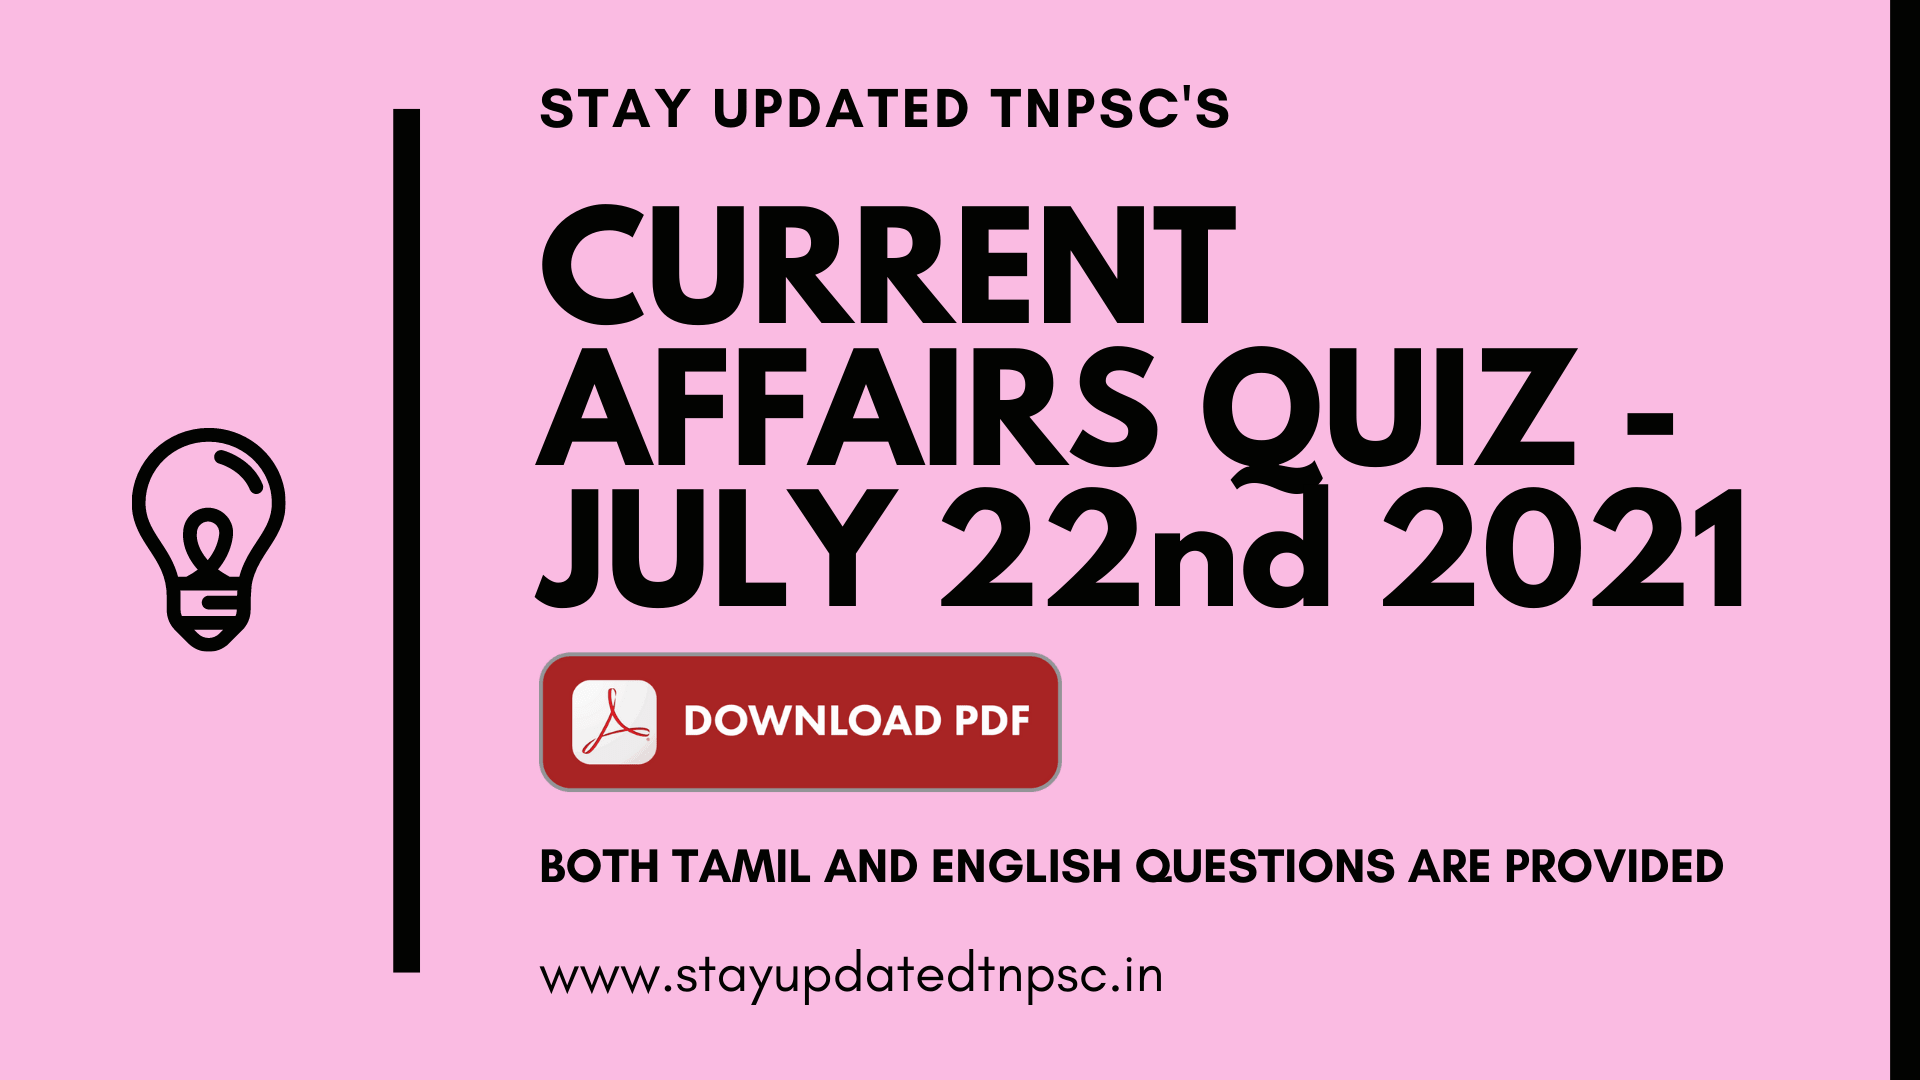 TNPSC DAILY CURRENT AFFAIRS: 22 JUNE 2021